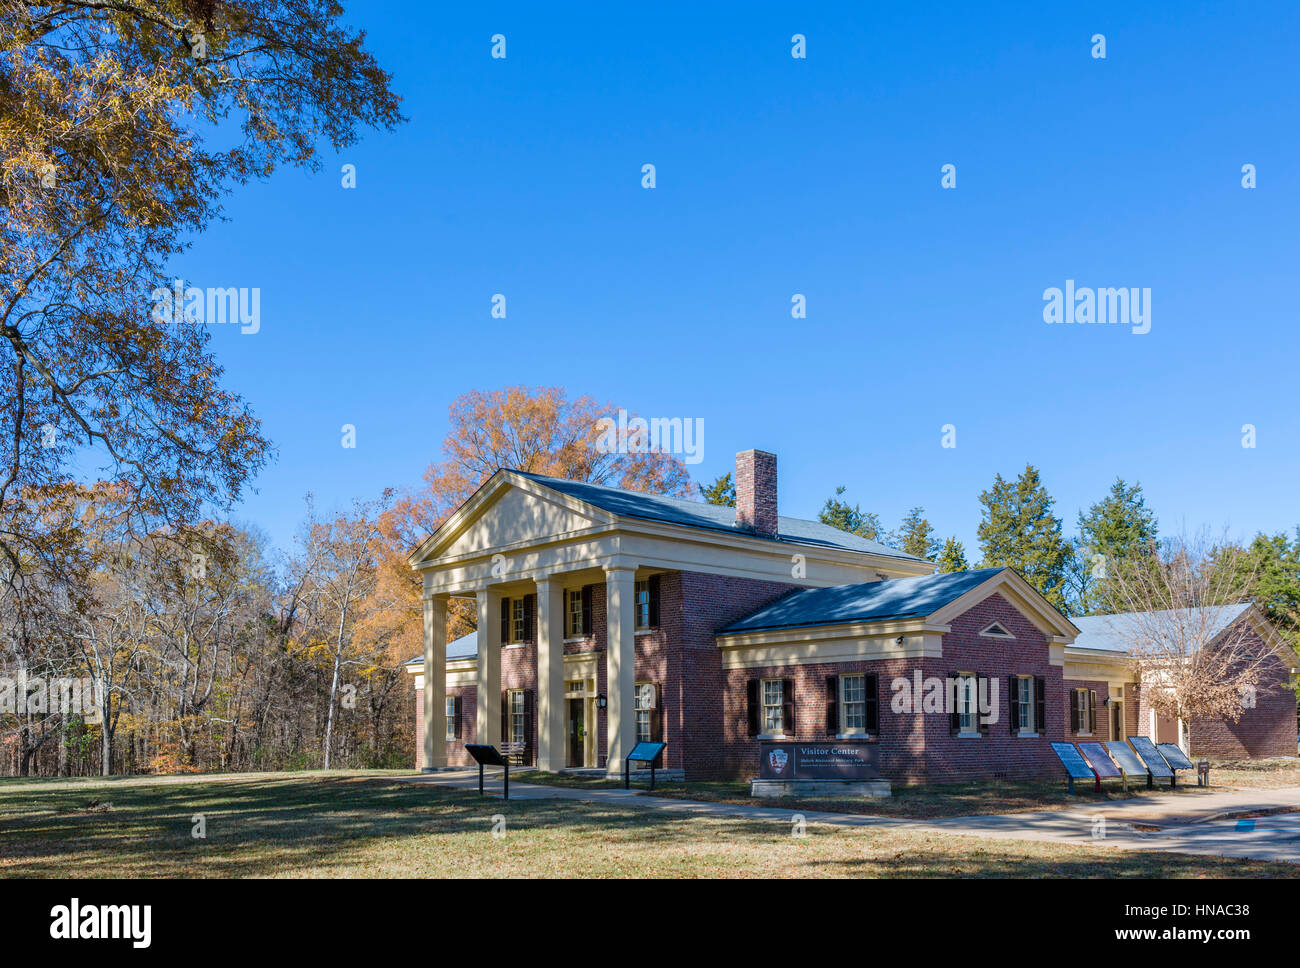 Shiloh National Military Park Visitor Center, New York, USA Banque D'Images